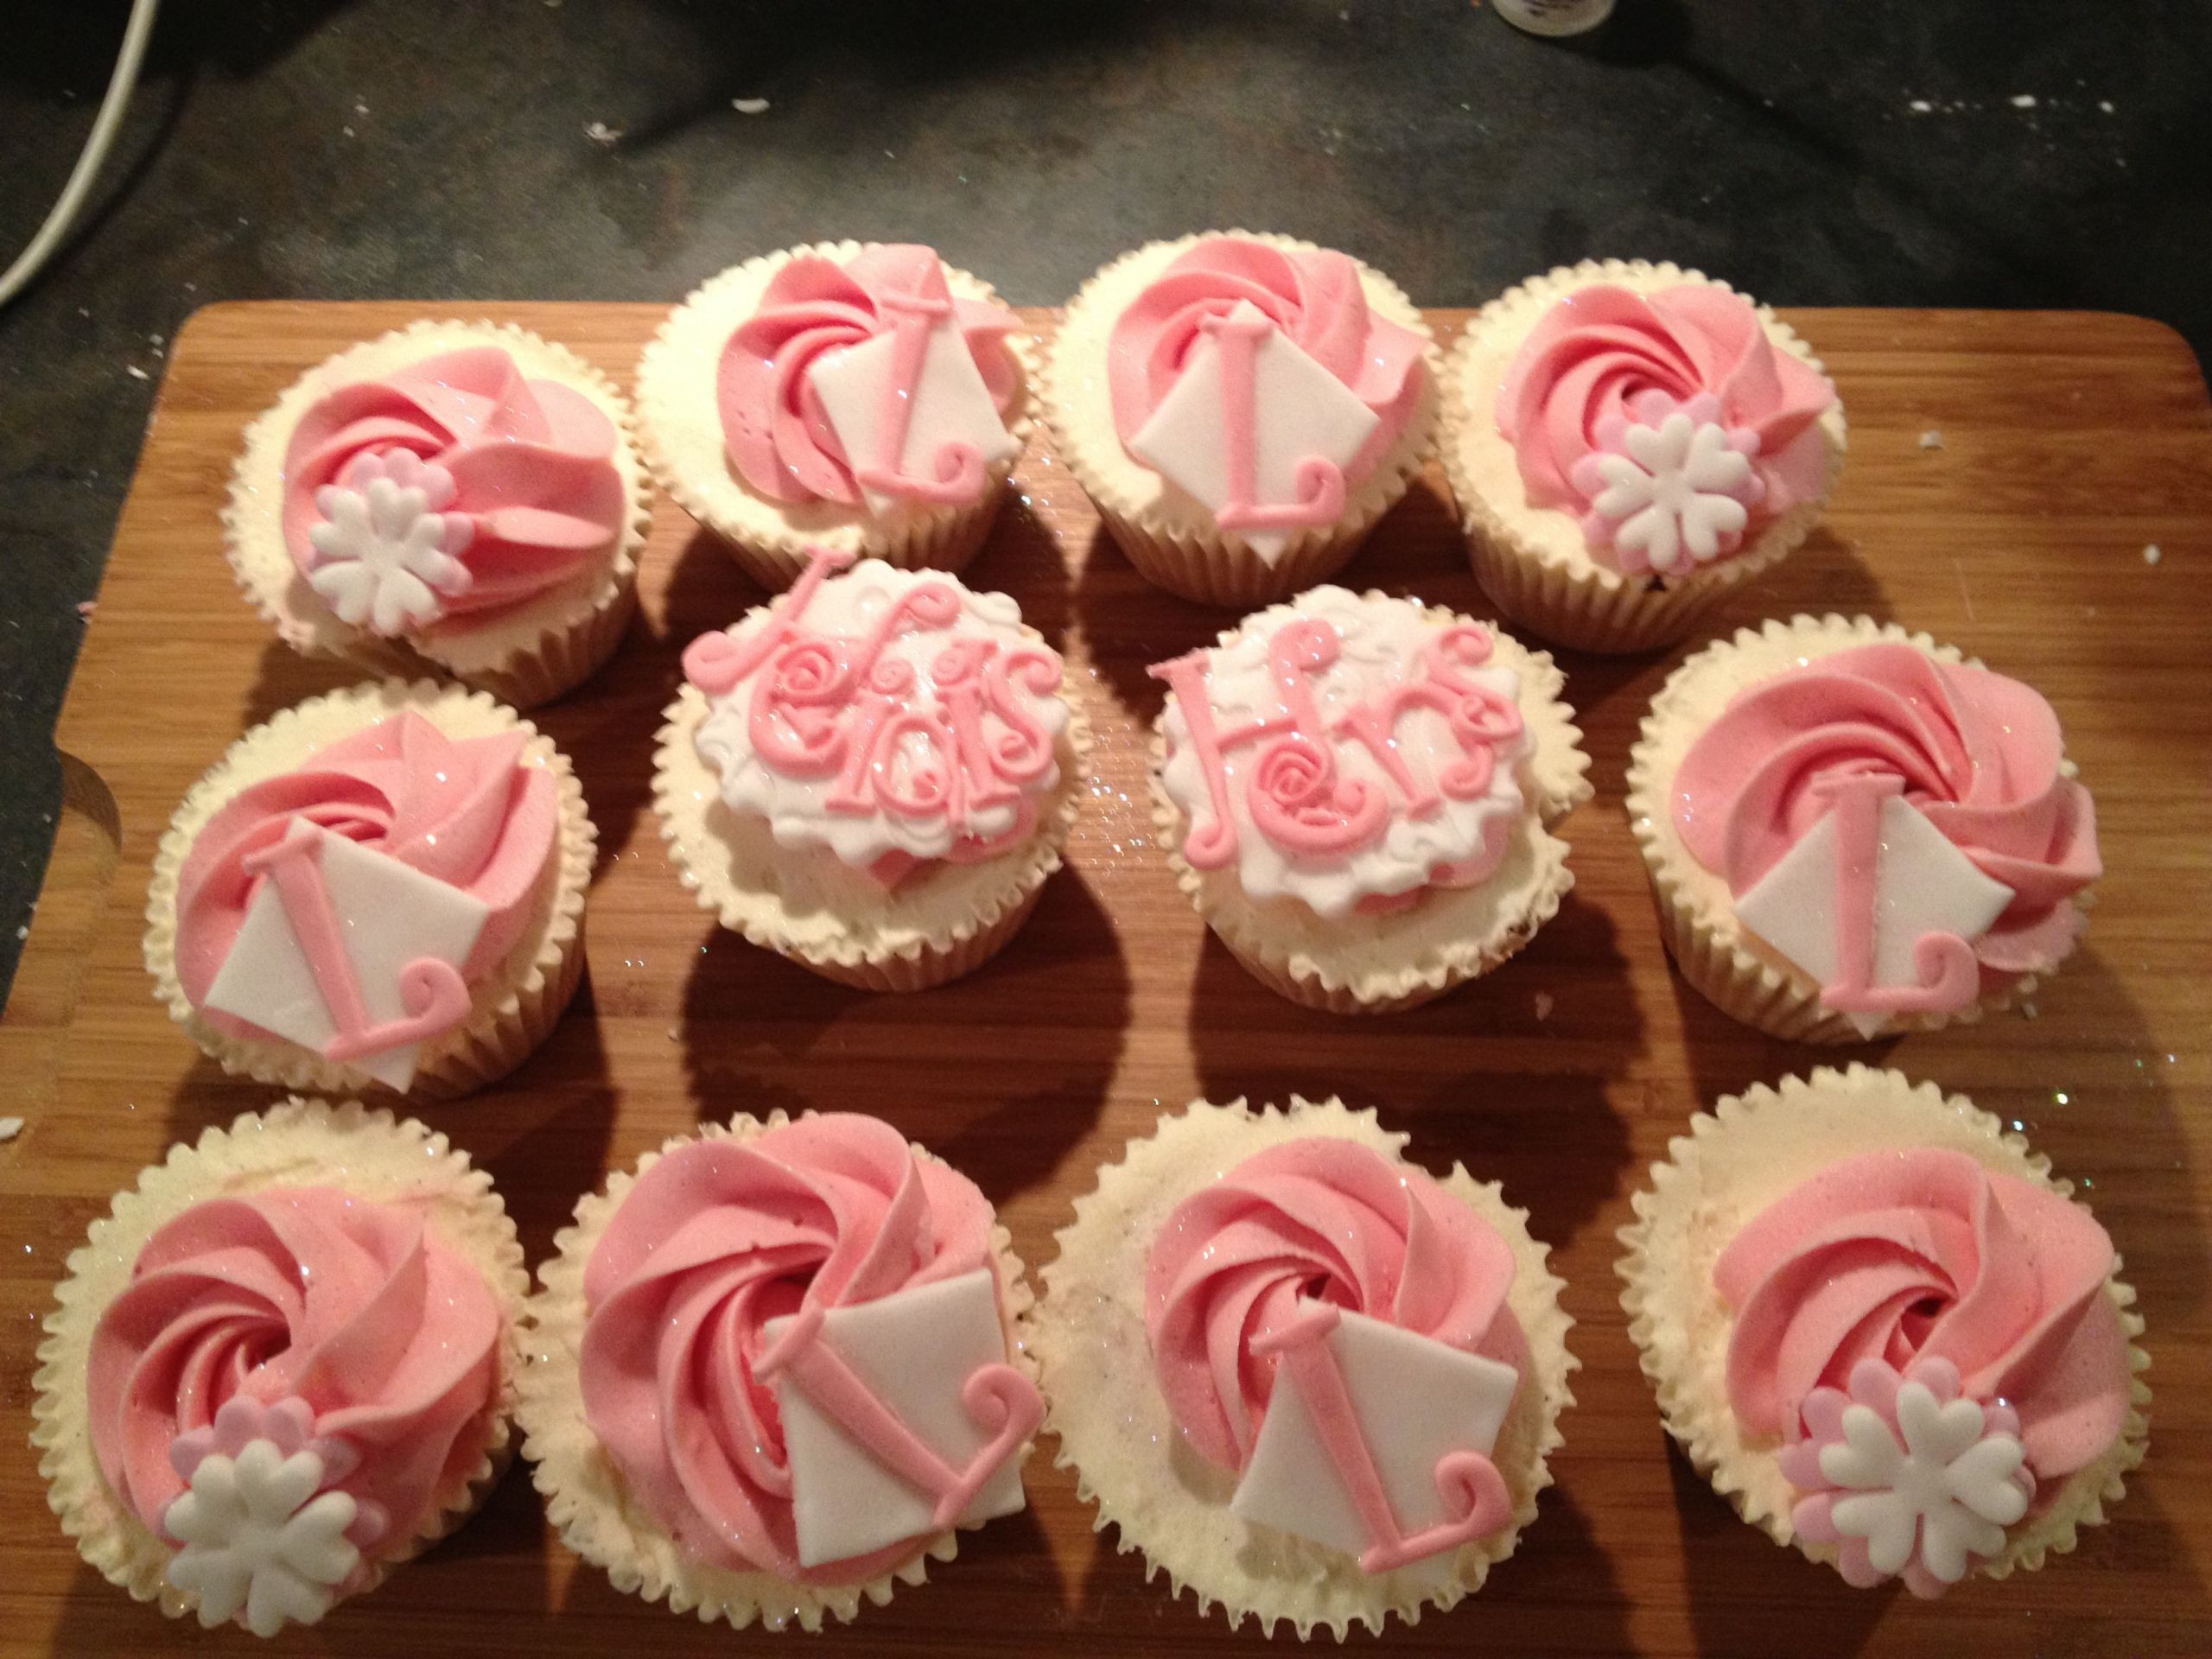 Bachelorette Party Cupcake Ideas
 My hen party cupcakes